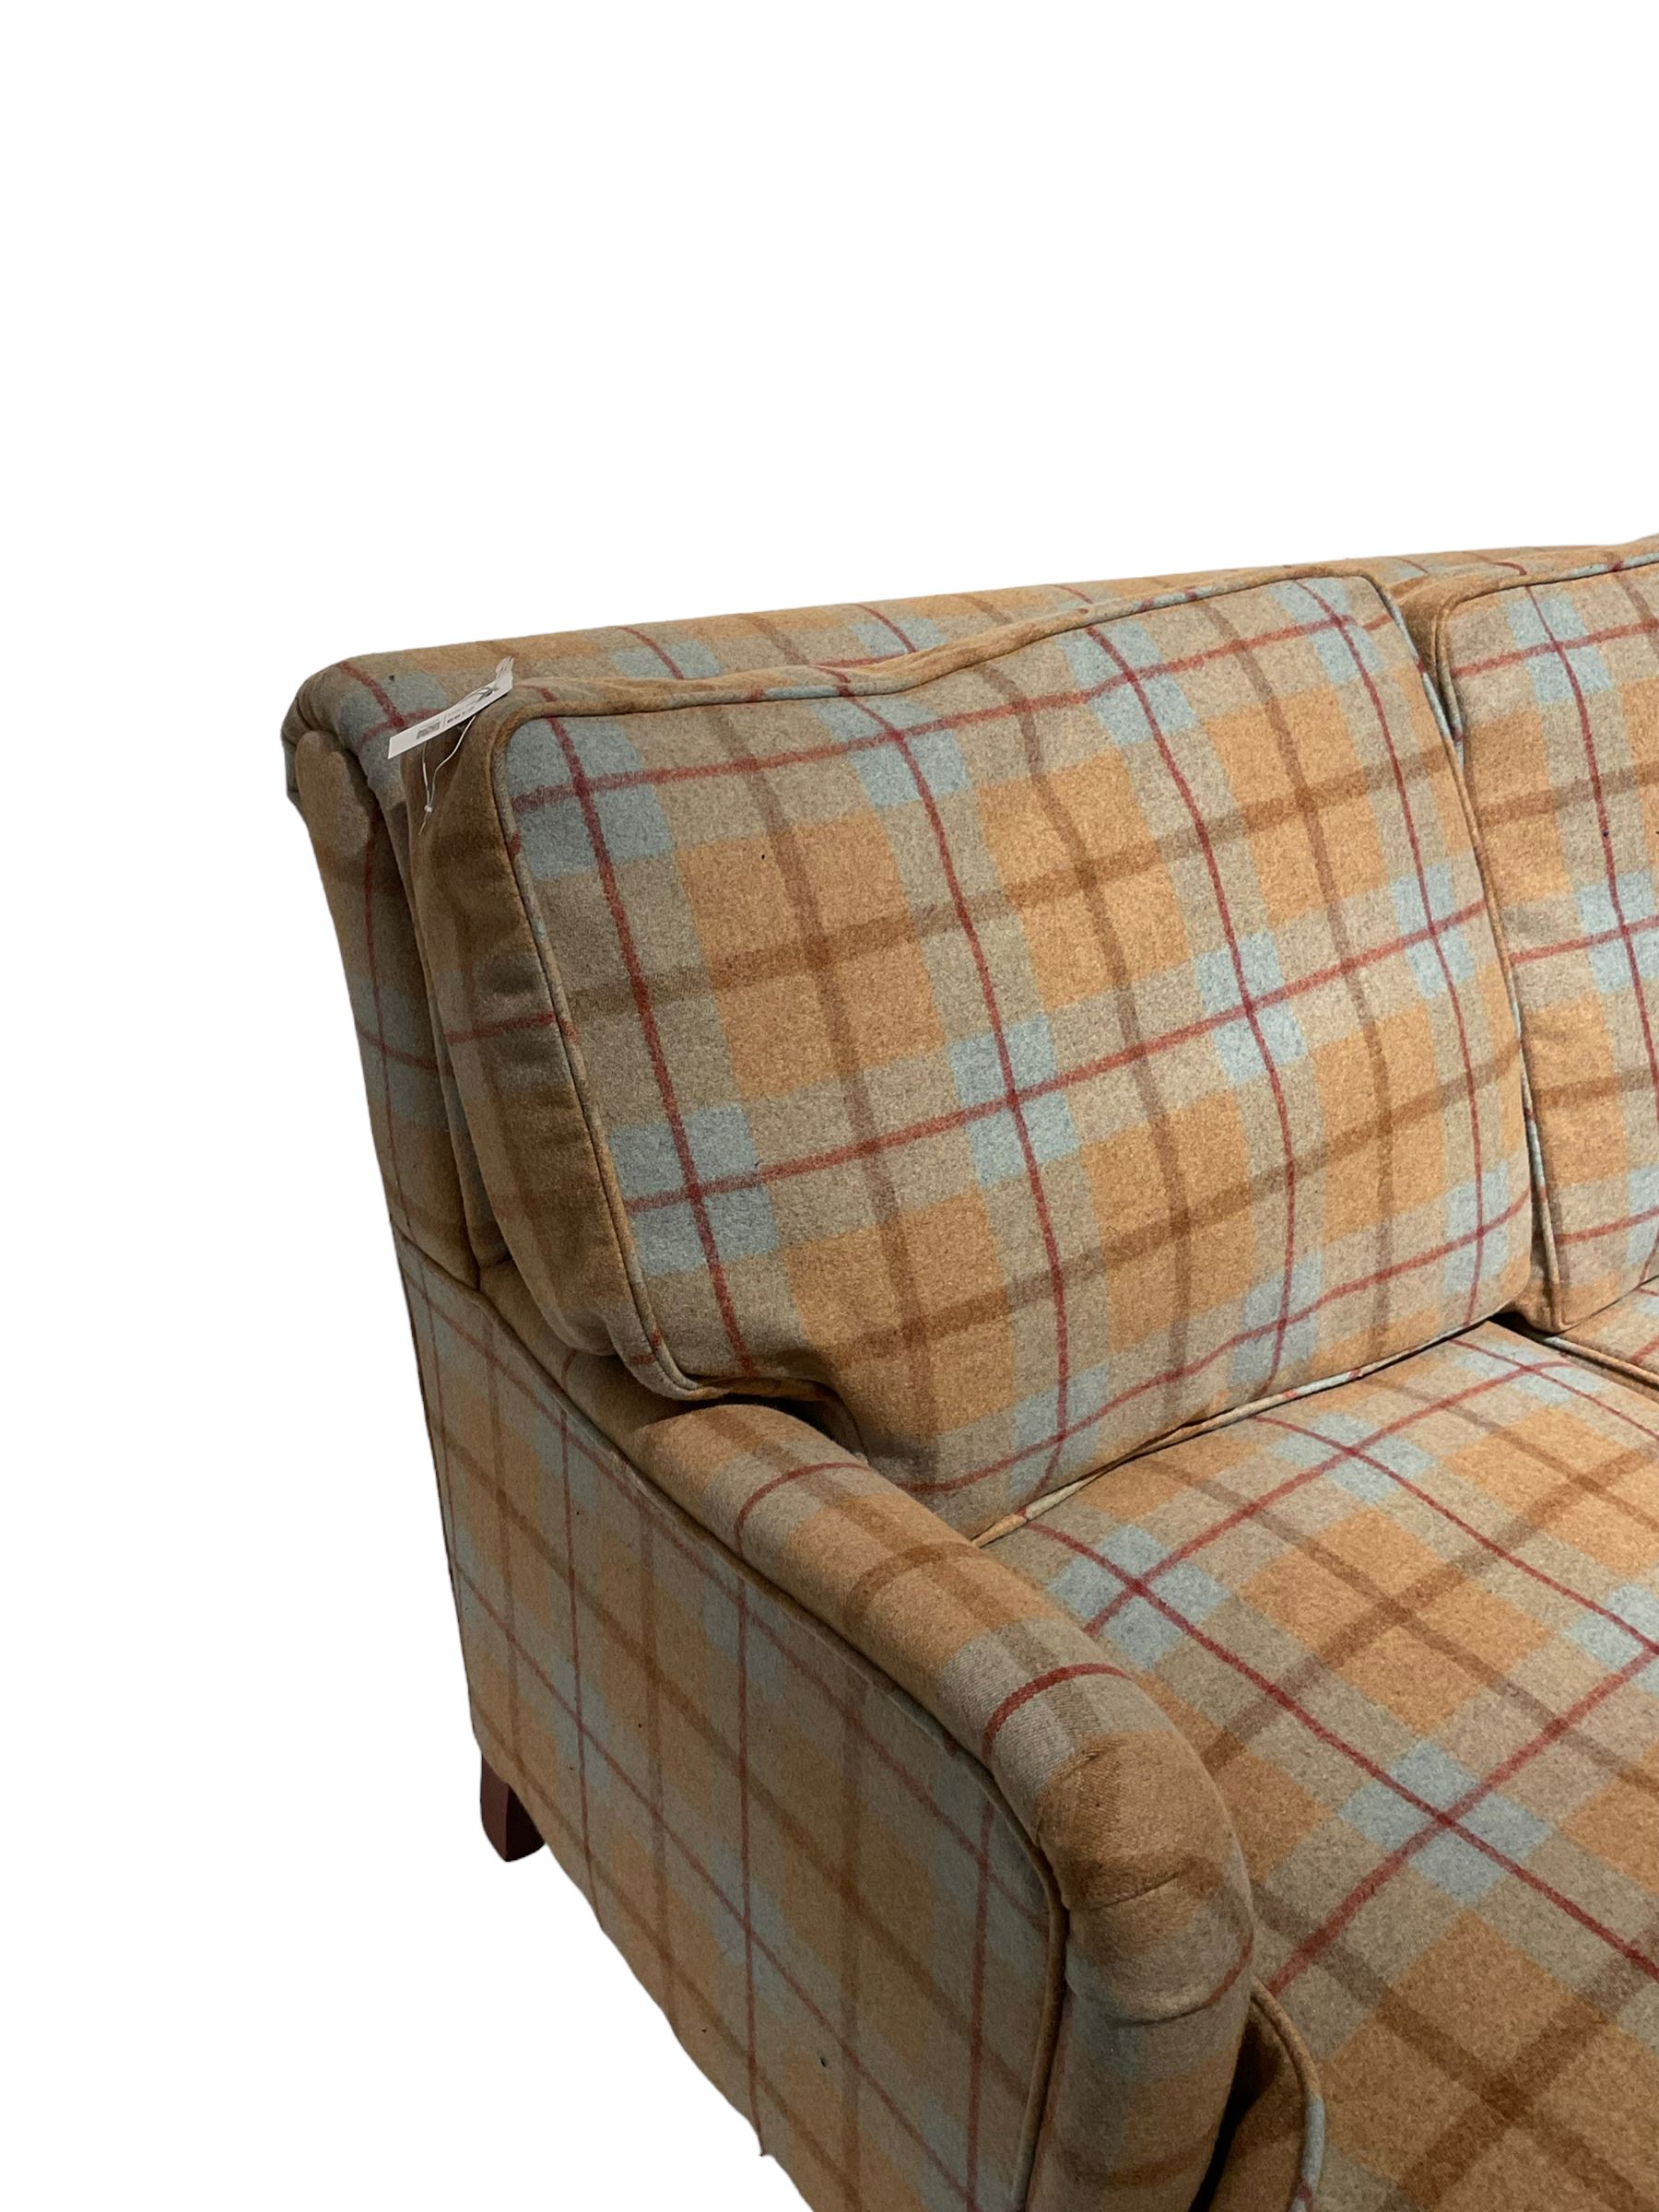 Howard design feather filled tartan pattern two seat sofa on Victorian style turned legs with castor - Image 5 of 5